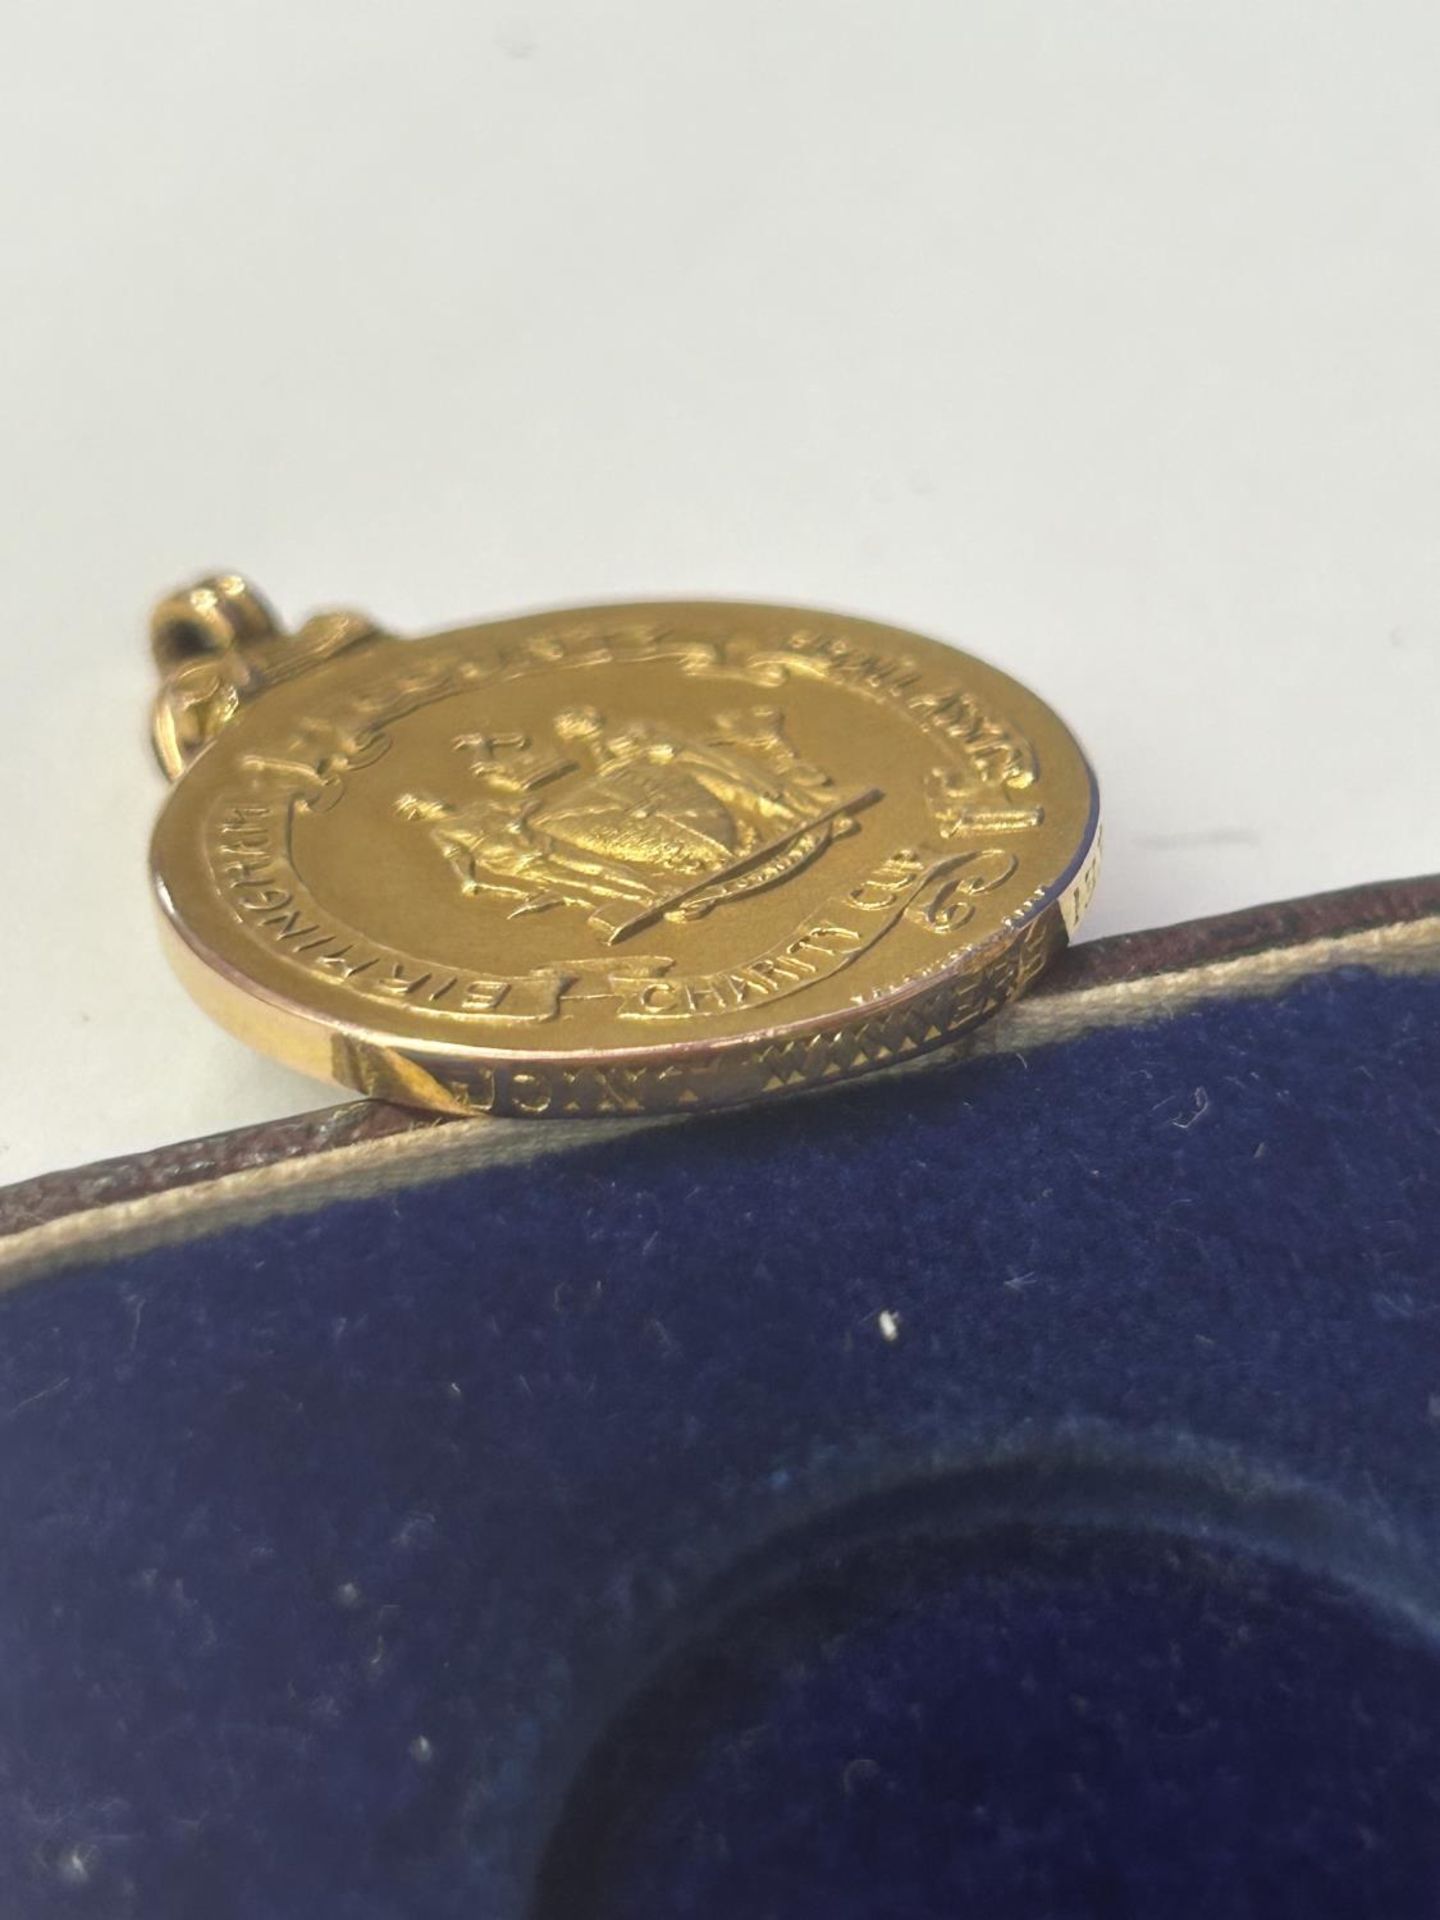 A HALLMARKED 9 CARAT GOLD BIRMINGHAM COUNTY FOOTBALL ASSOCIATION CHARITY CUP JOINT WINNERS MEDAL - Image 5 of 6